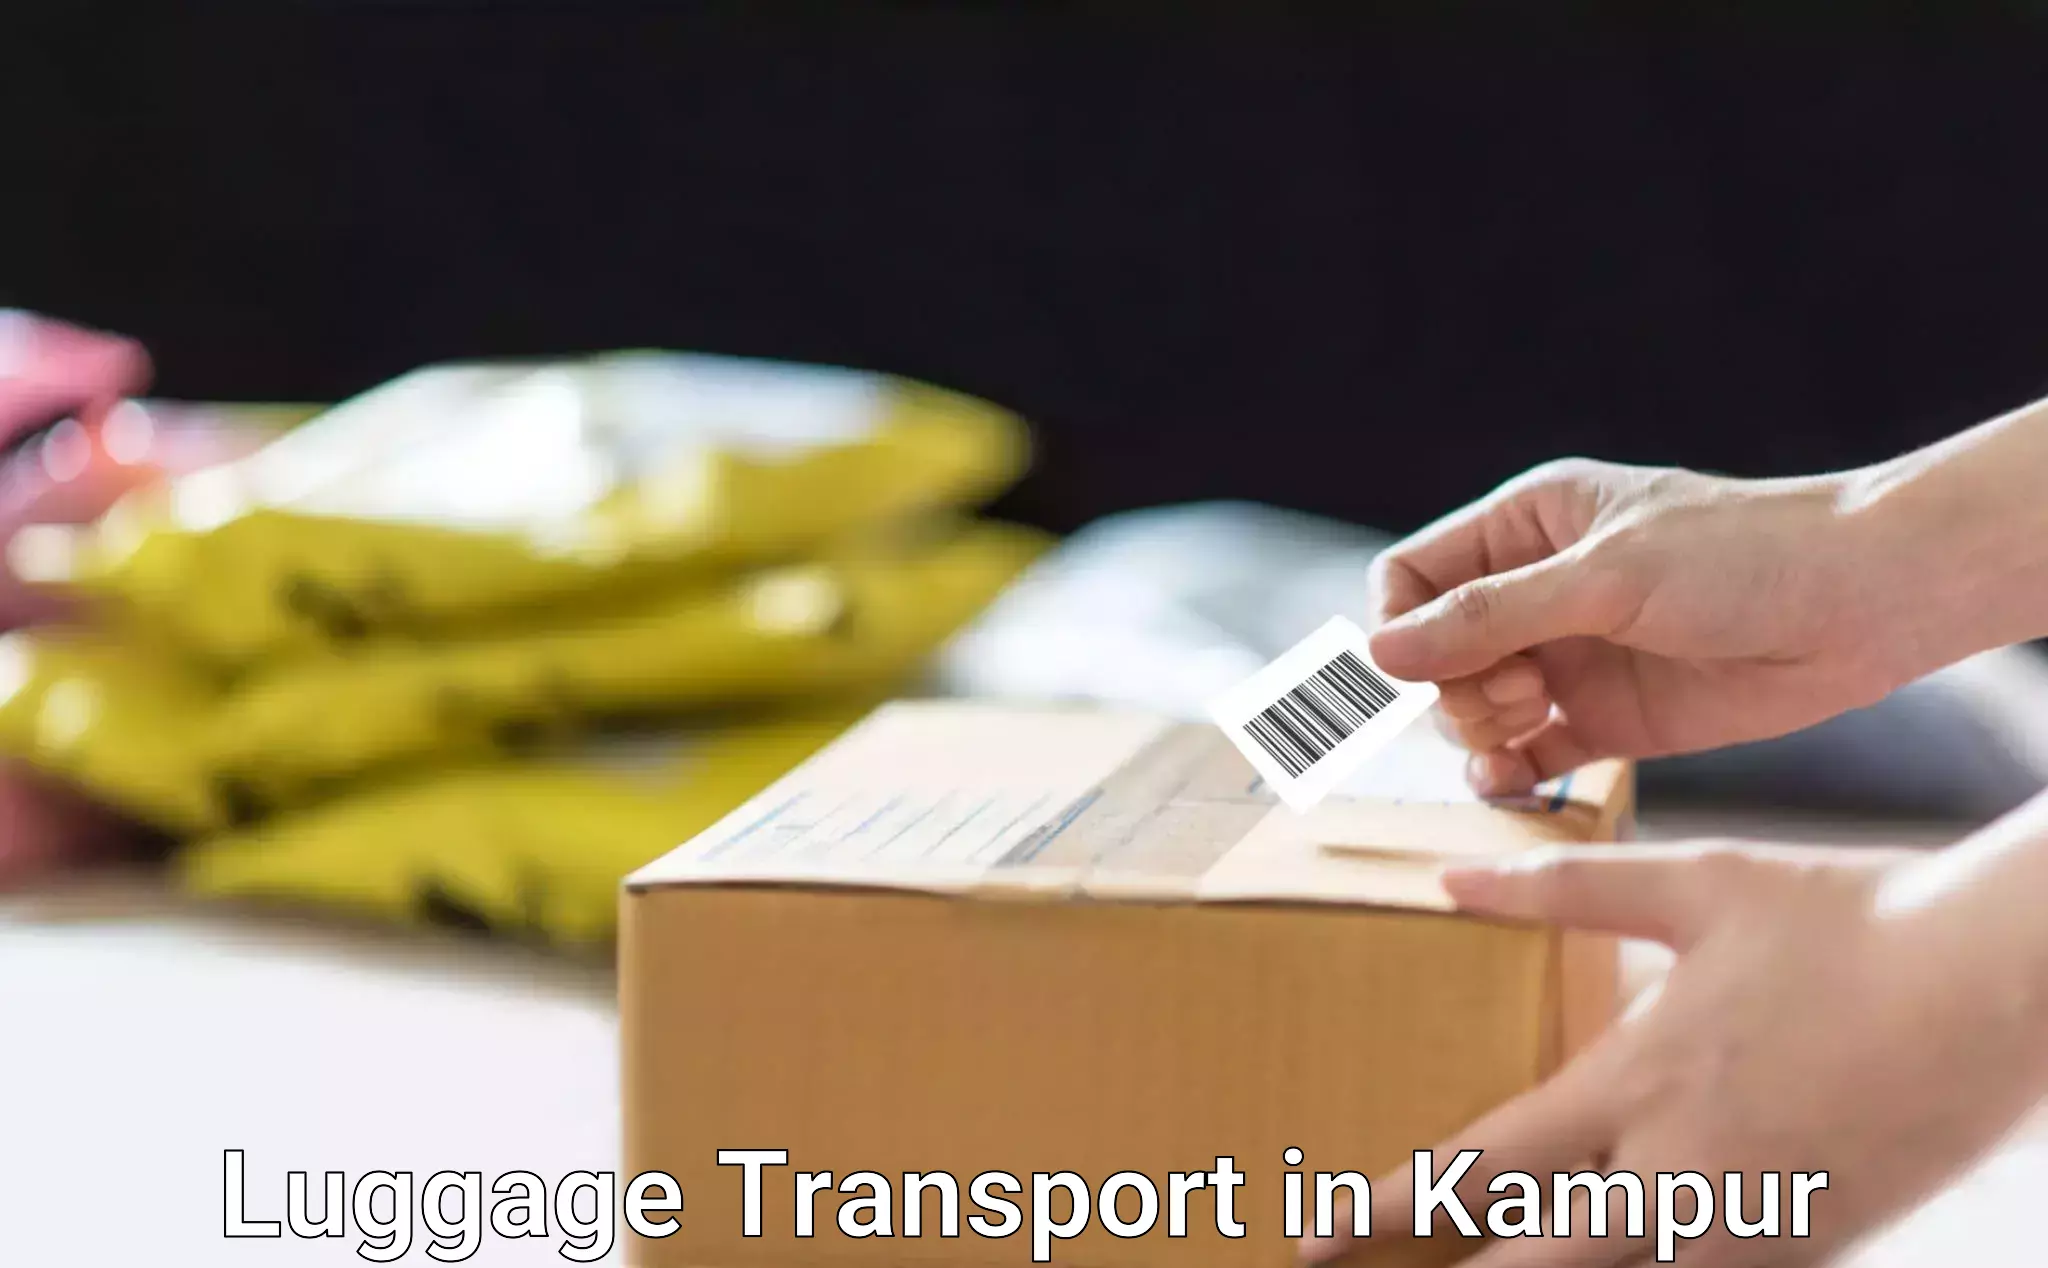 Nationwide luggage transport in Kampur